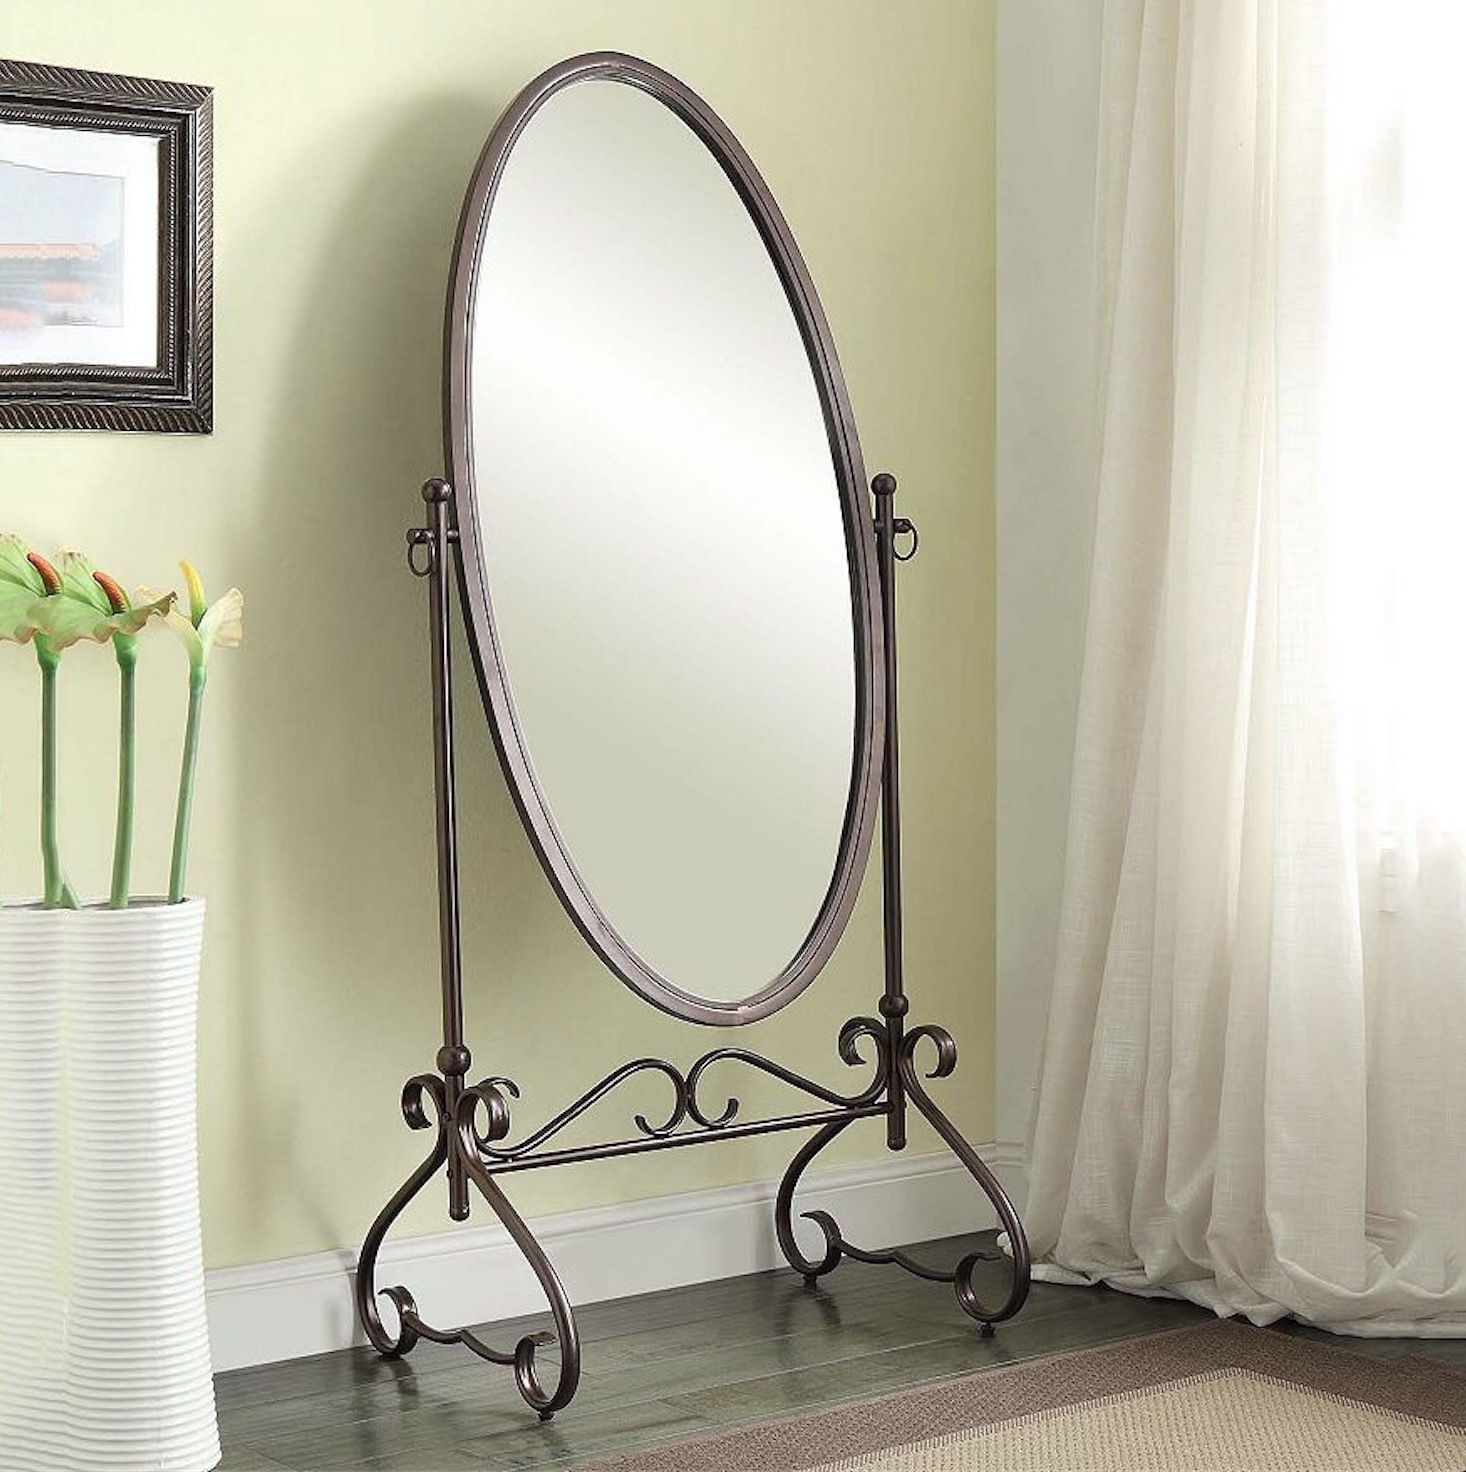 Cheval Floor Mirror Large Oval Antique Bedroom Full Length Tilt Pertaining To Free Standing Antique Mirror (View 15 of 15)